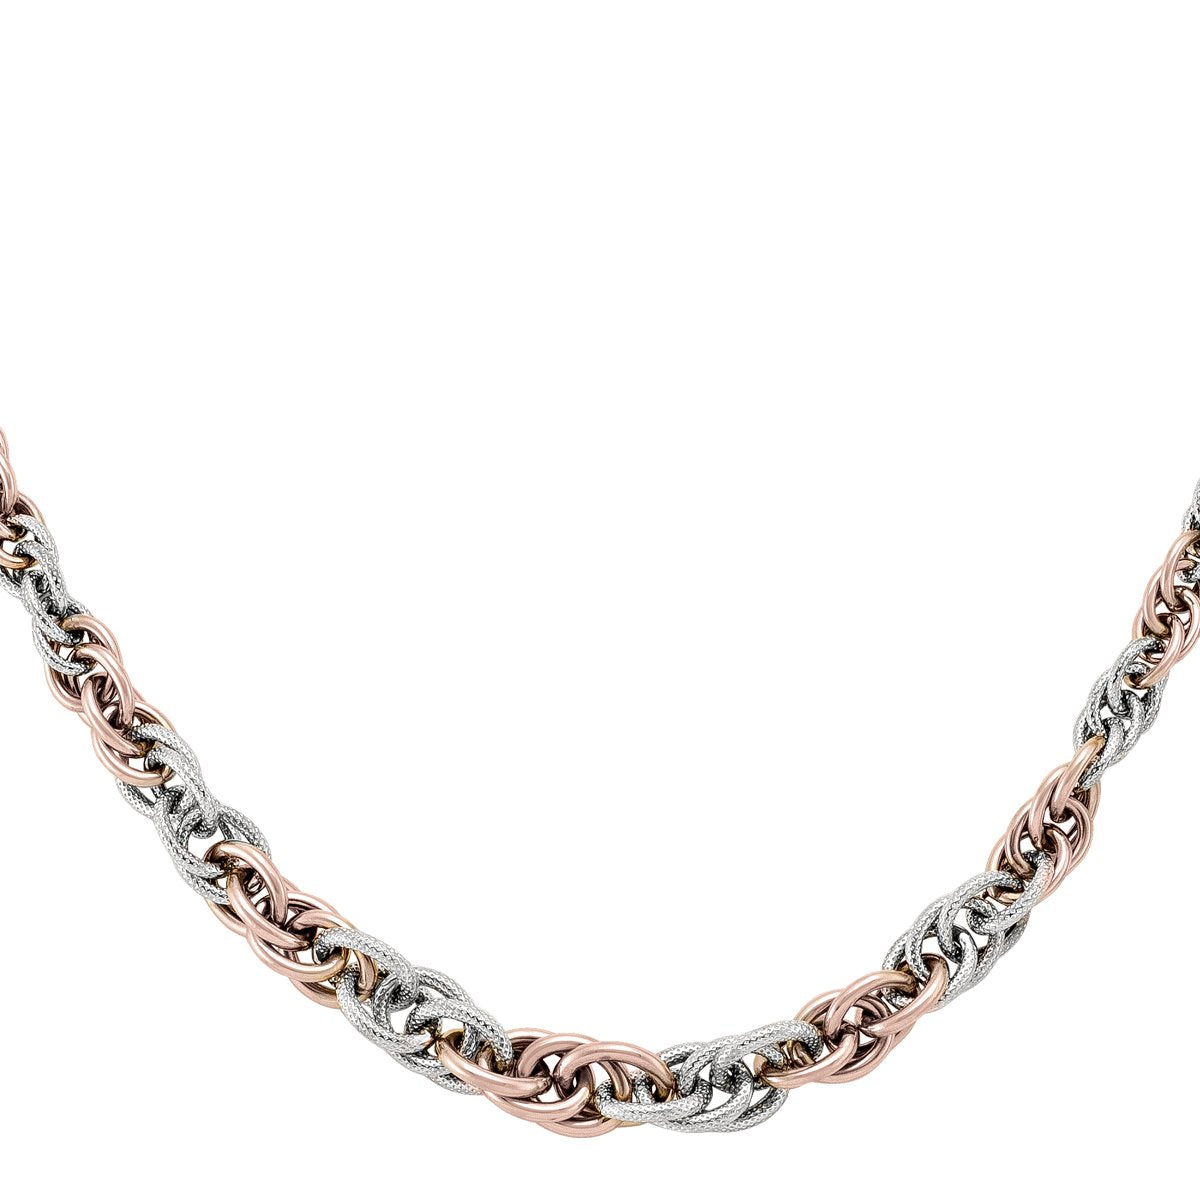 LADIES NECKLACES PINK AND WHITE GOLD FANCY HOLLOW 